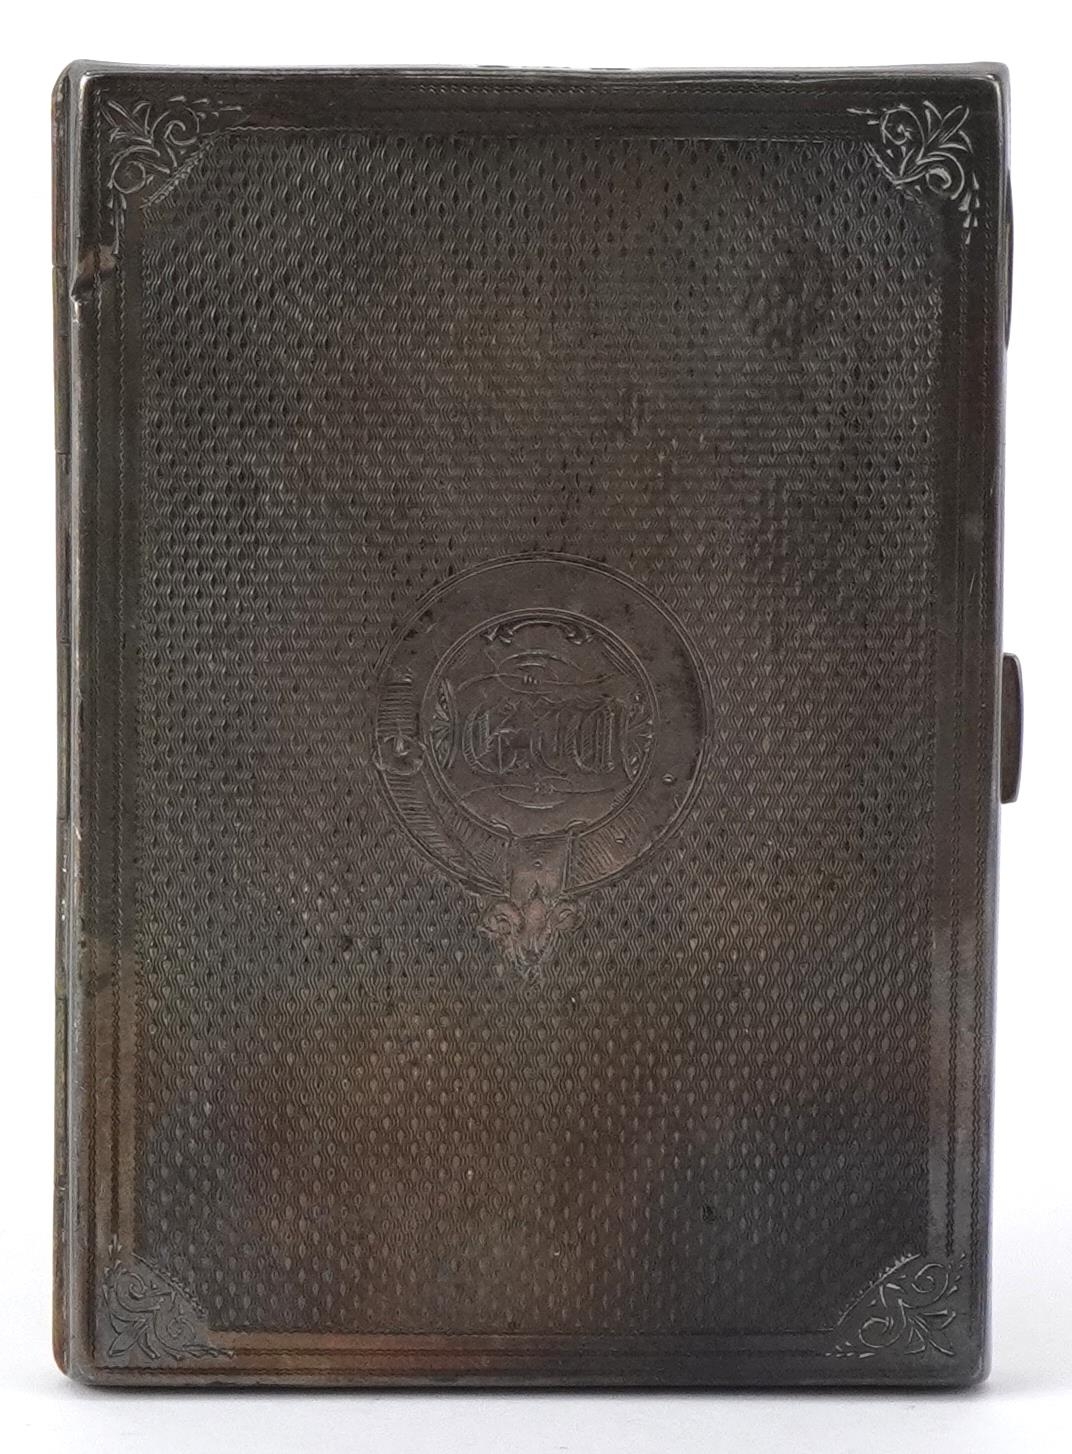 Frederick Marson, Victorian silver engine turned aide memoire with propelling pencil, Birmingham